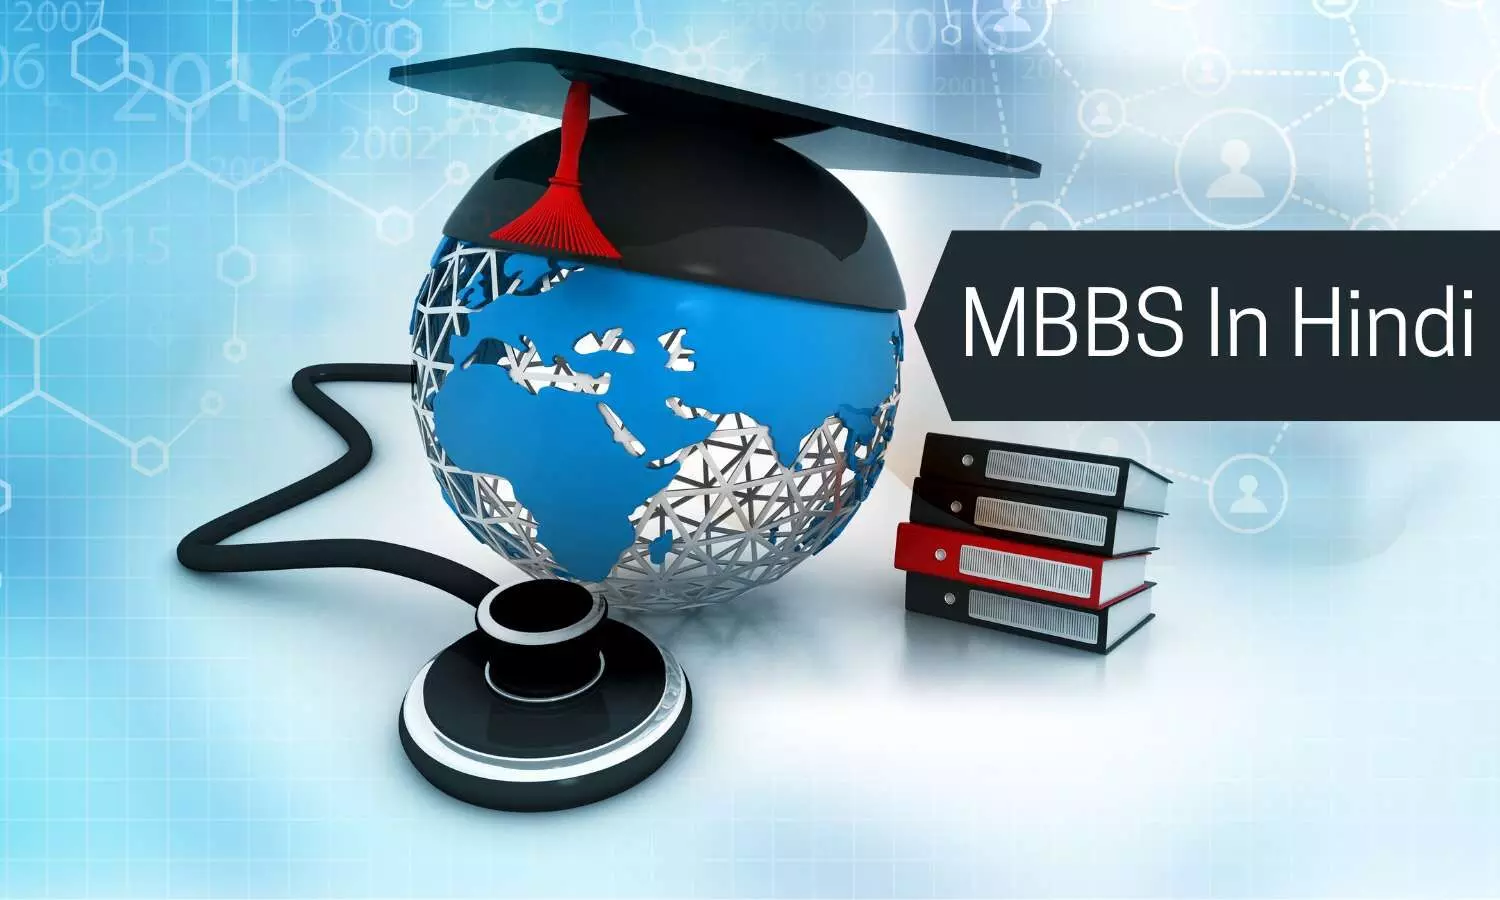 MBBS in regional language will limit scope for growth and knowledge, say Doctors